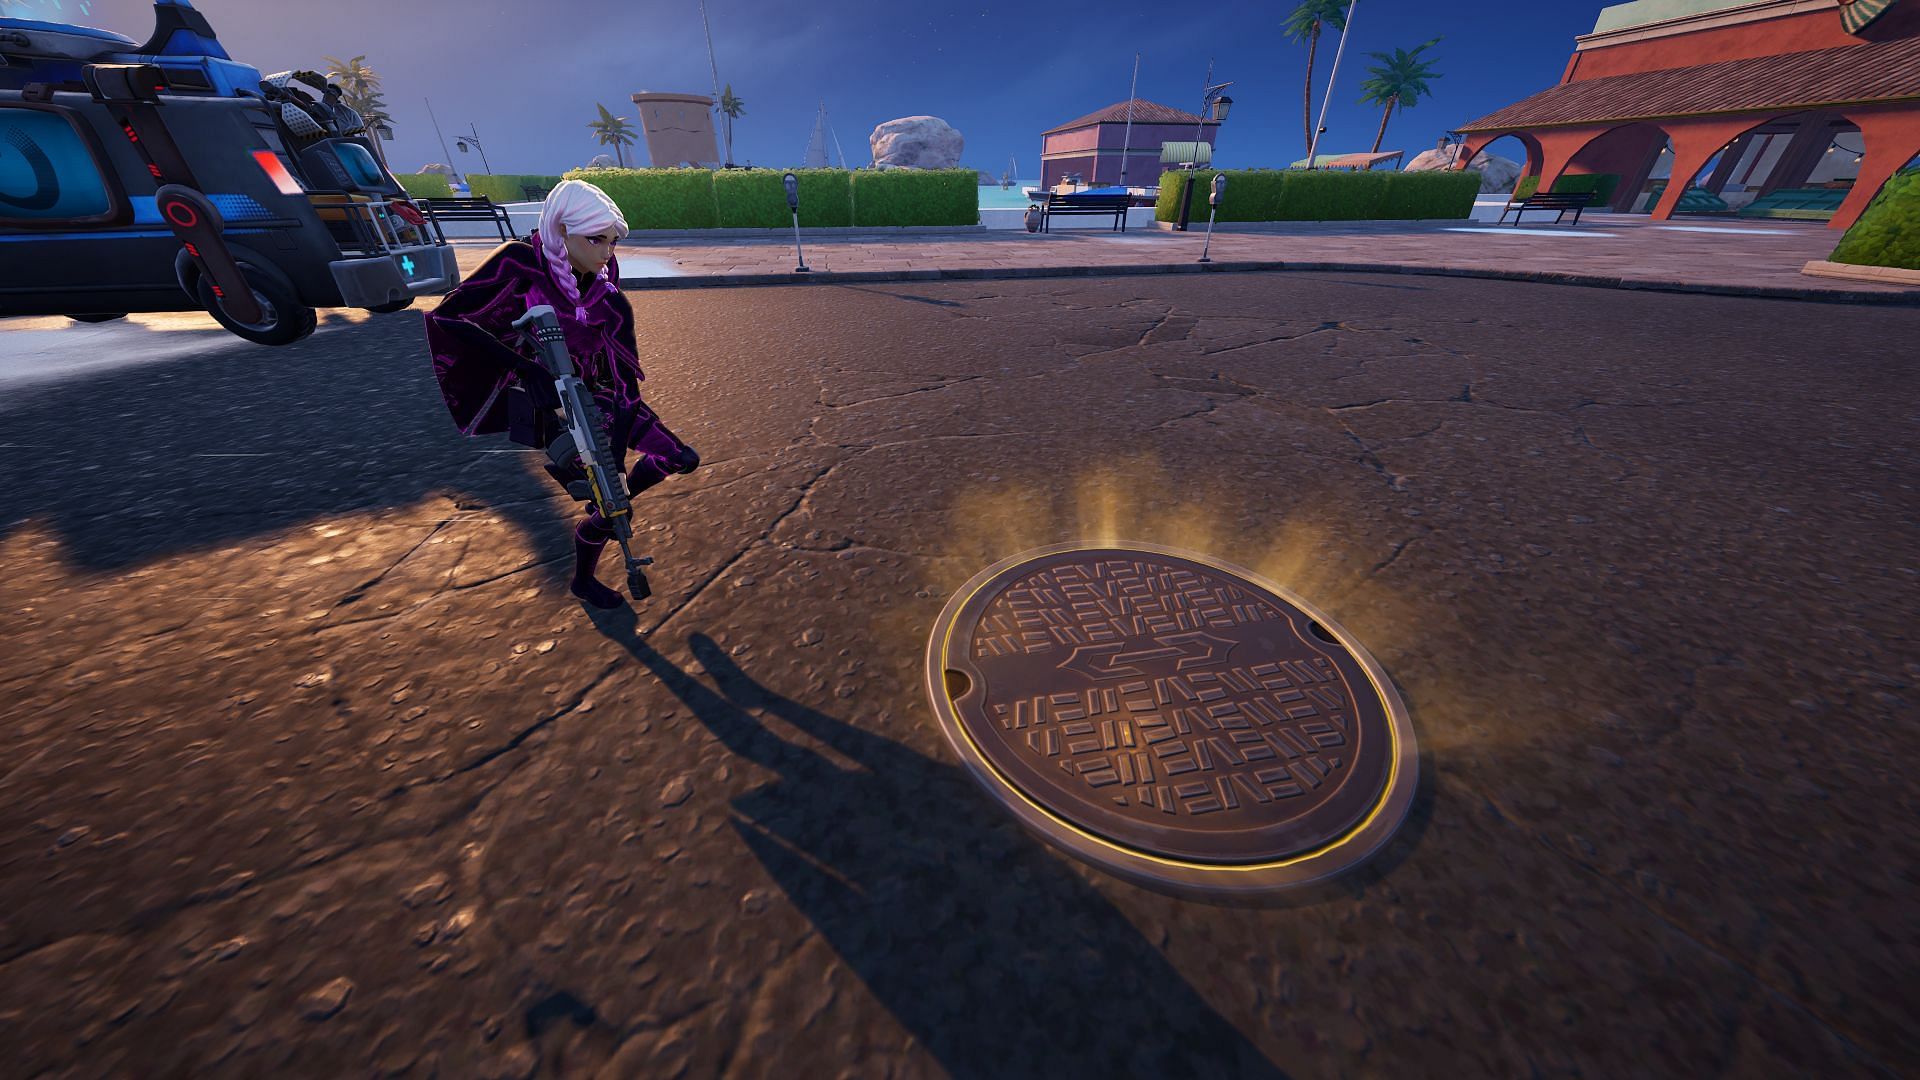 Interact with glowing manholes to travel through Sewer Pipes in different matches in Fortnite. (Image via Epic Games)